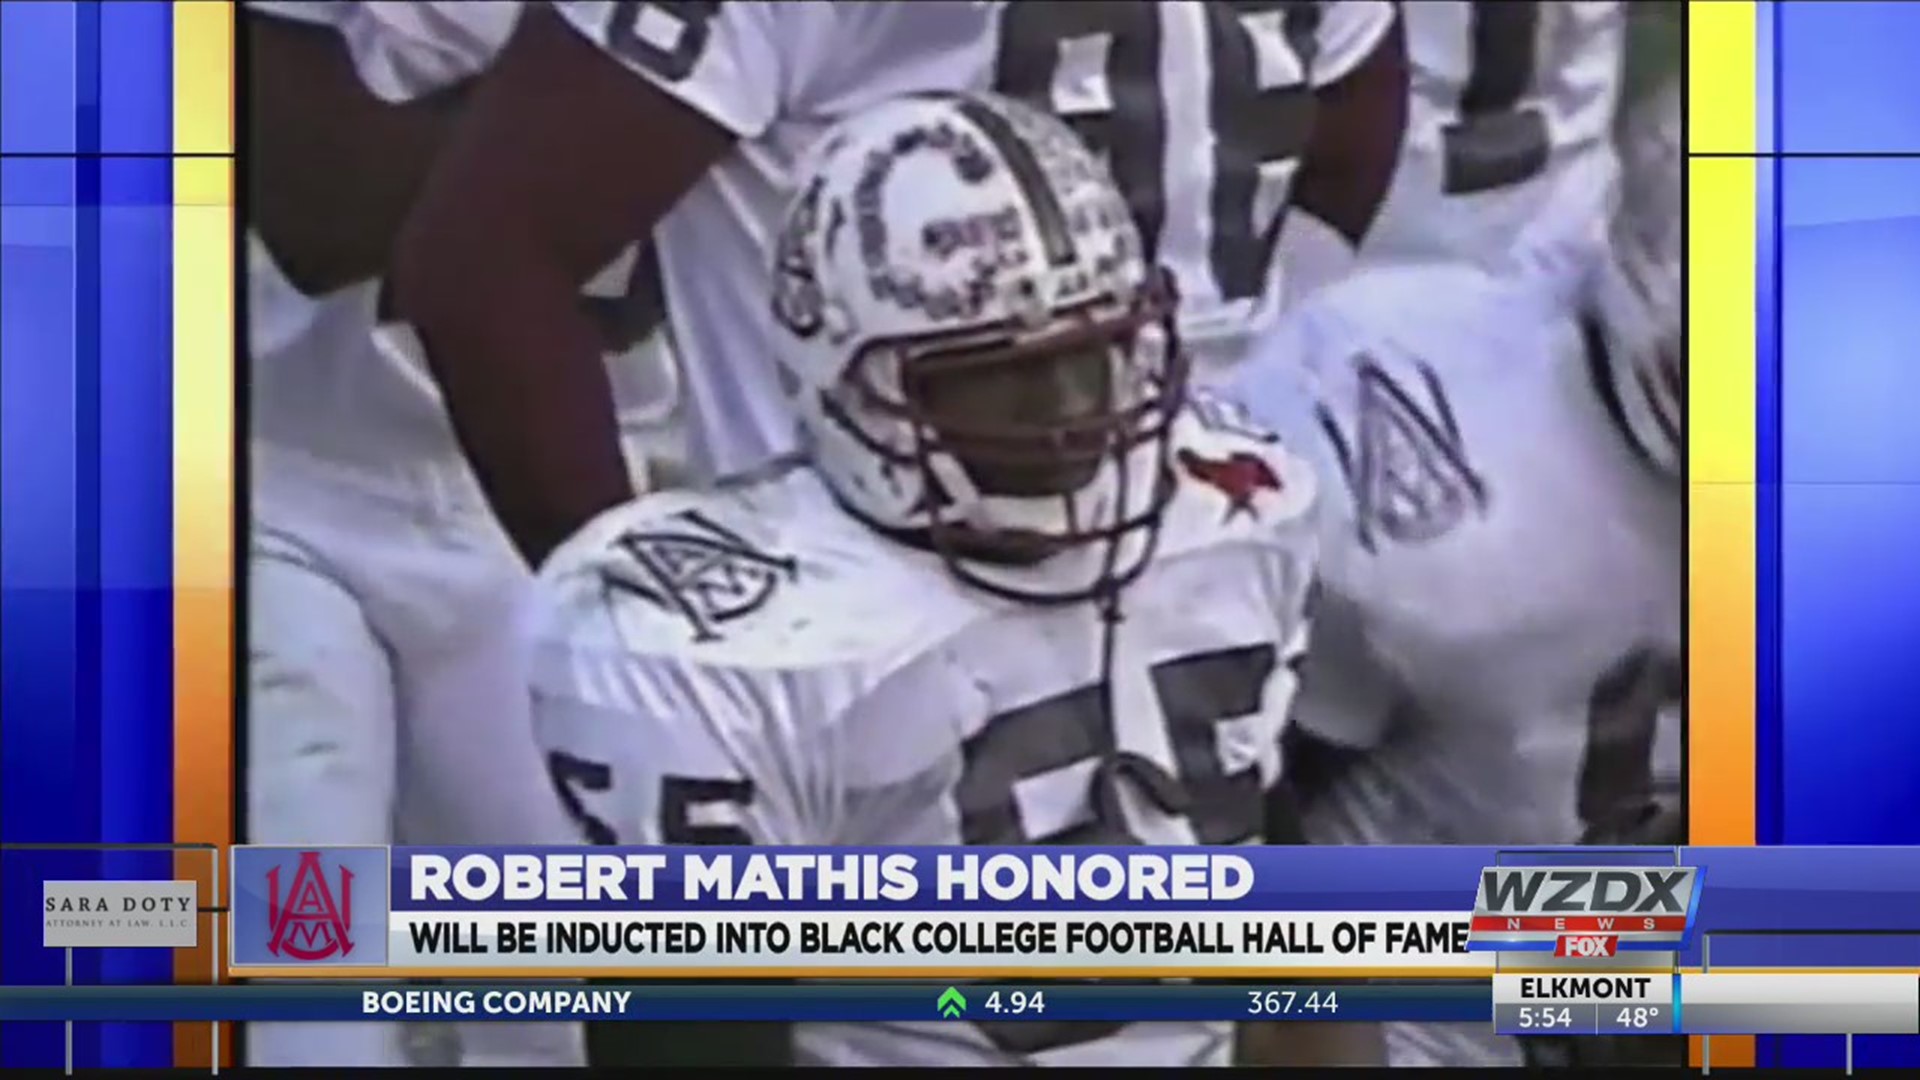 Robert Mathis is headed for the Black College Football Hall of Fame. Before playing 14 years with the Indianapolis Colts, Mathis impressed as a four-year starter for Alabama A&M, where he set an NCAA I-AA record with 20 sacks during his senior season.